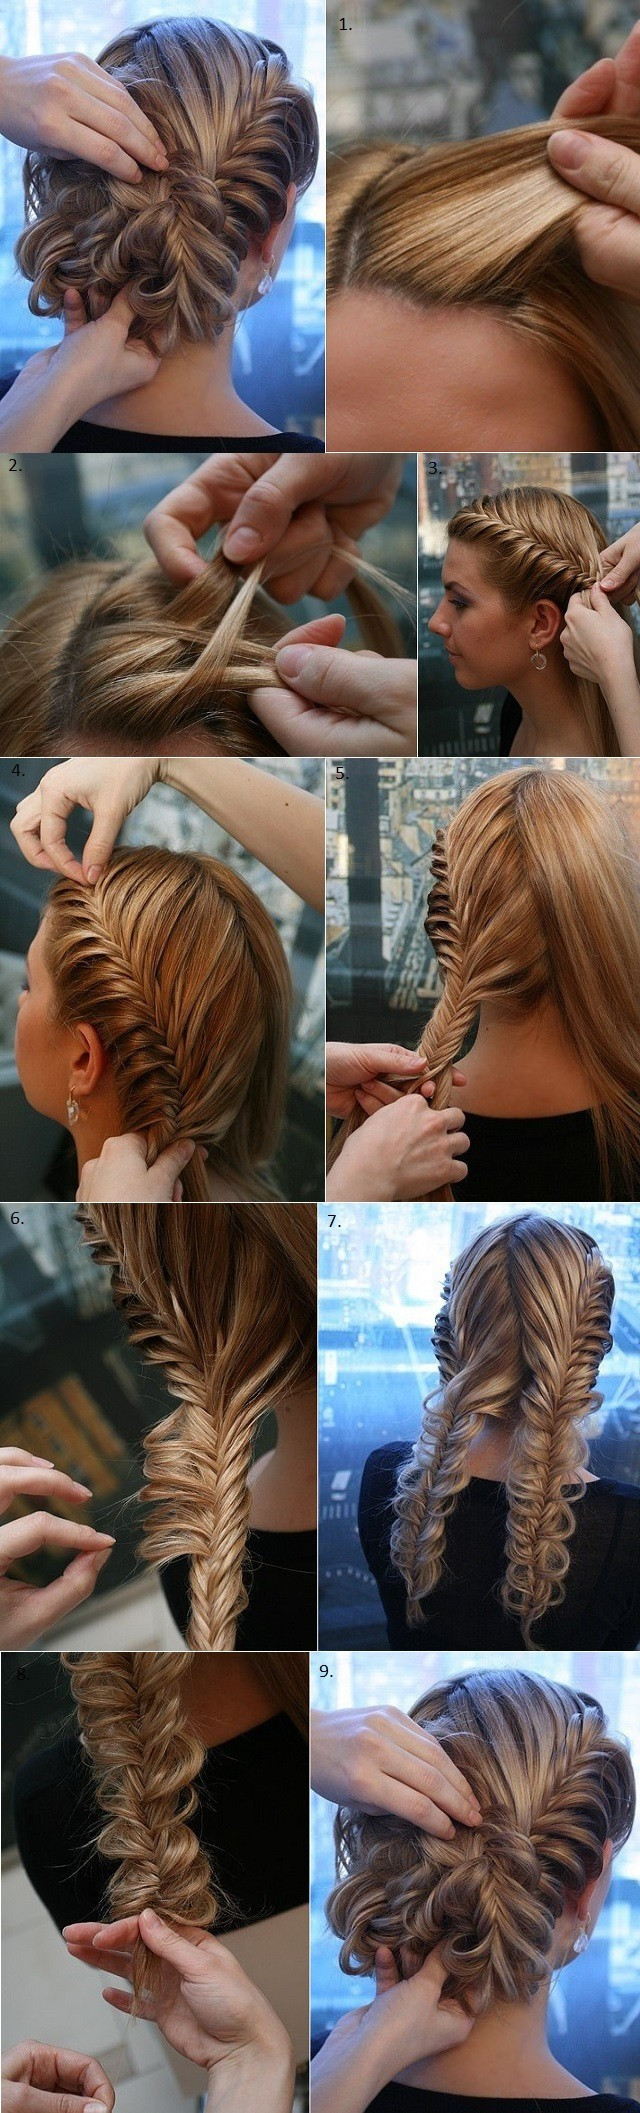 How To Make Cool Hairstyle
 20 Cute and Easy Braided Hairstyle Tutorials